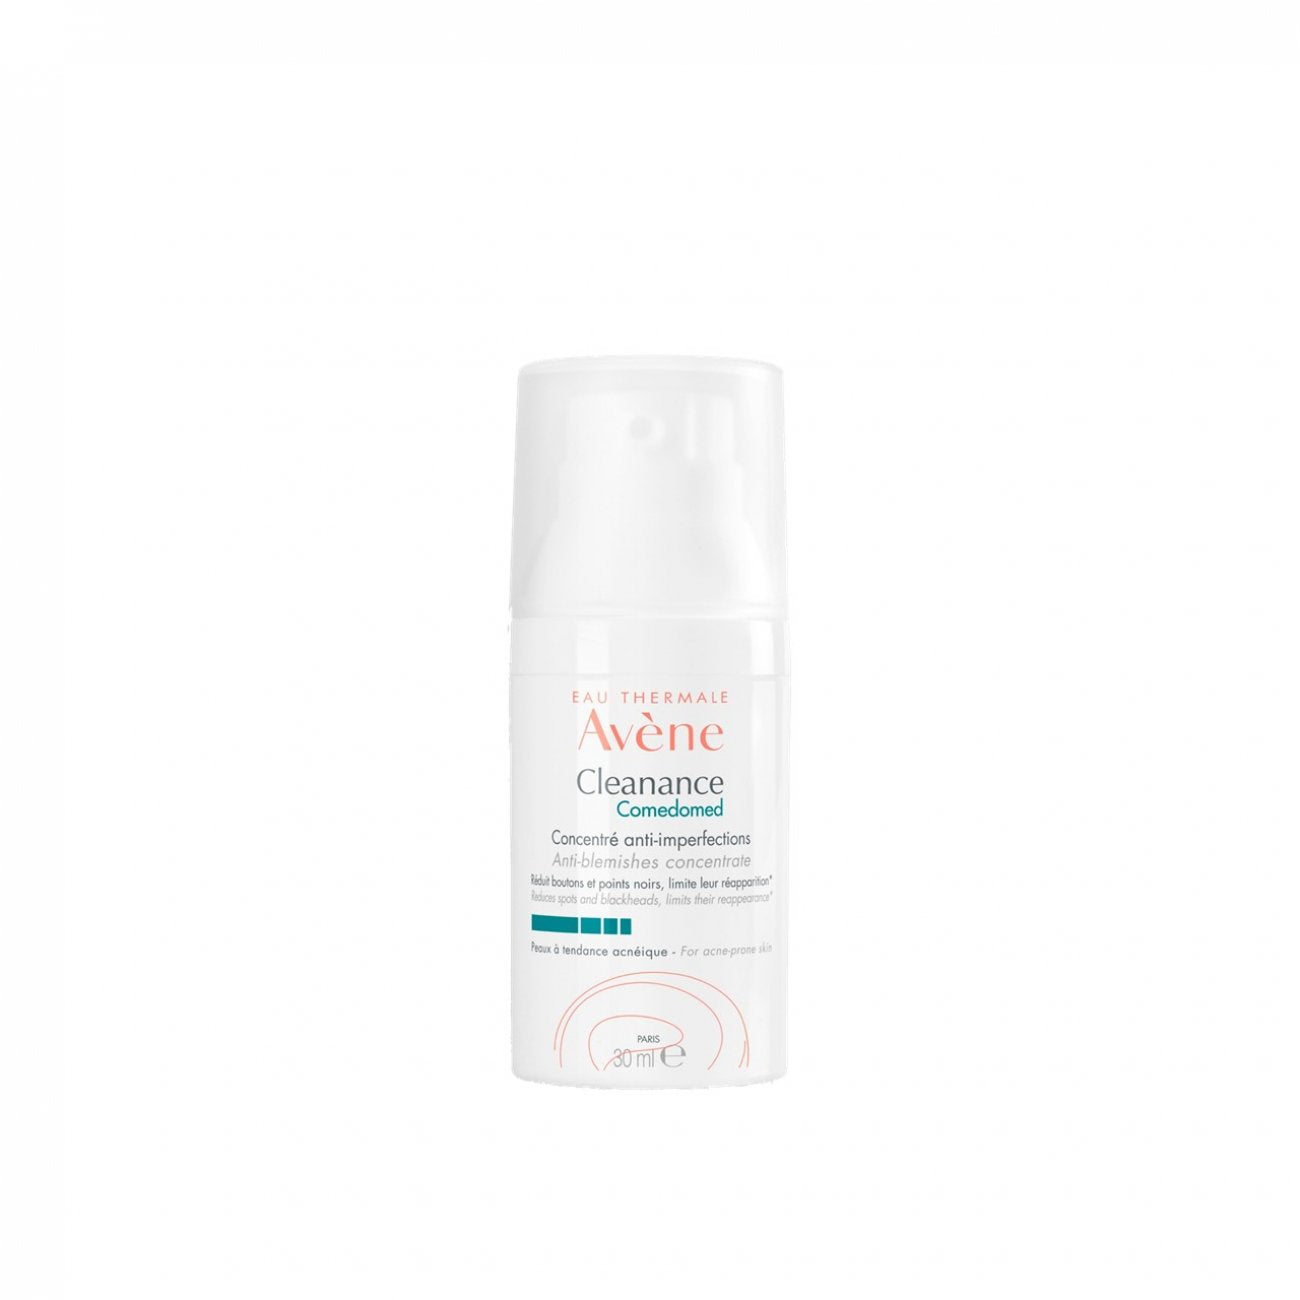 Avène Cleanance Comedomed Crème Imperfections Acné Points Noirs 30 ml